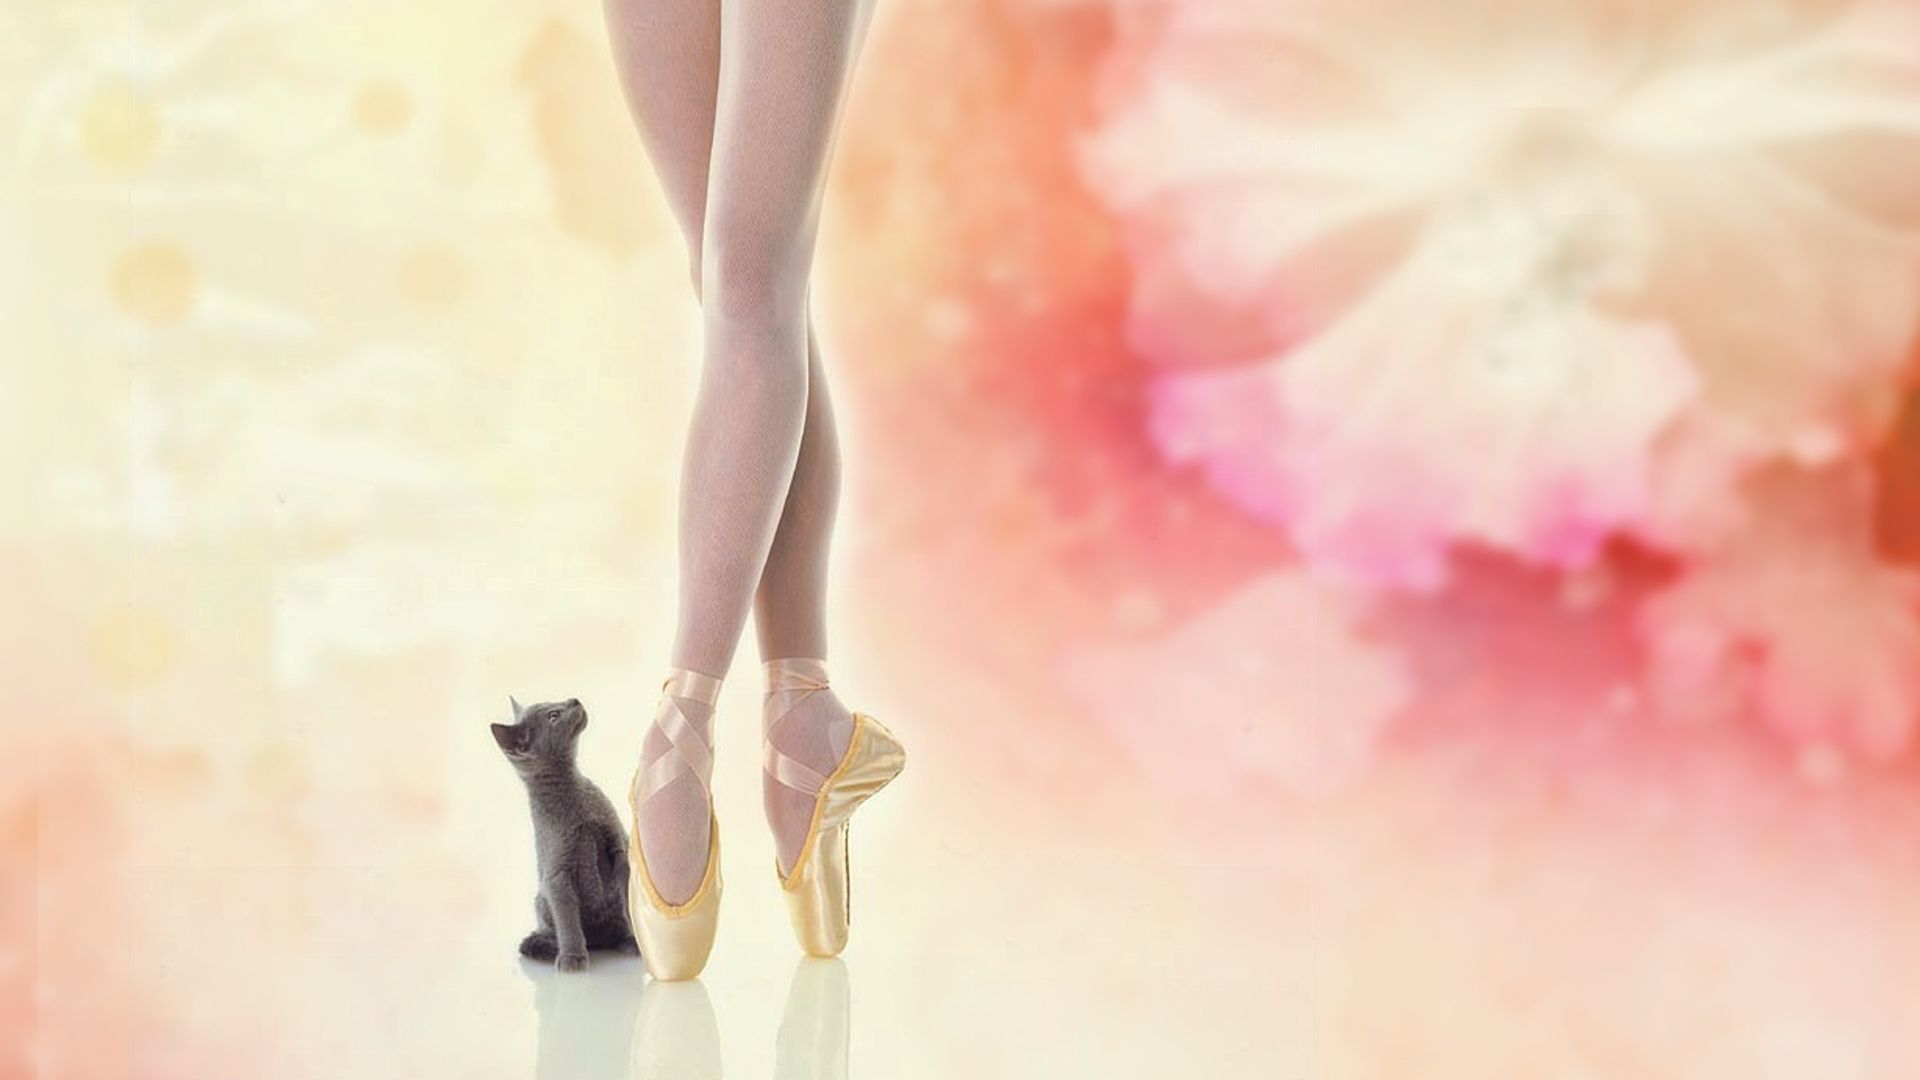  Ballerina HQ Background Wallpapers